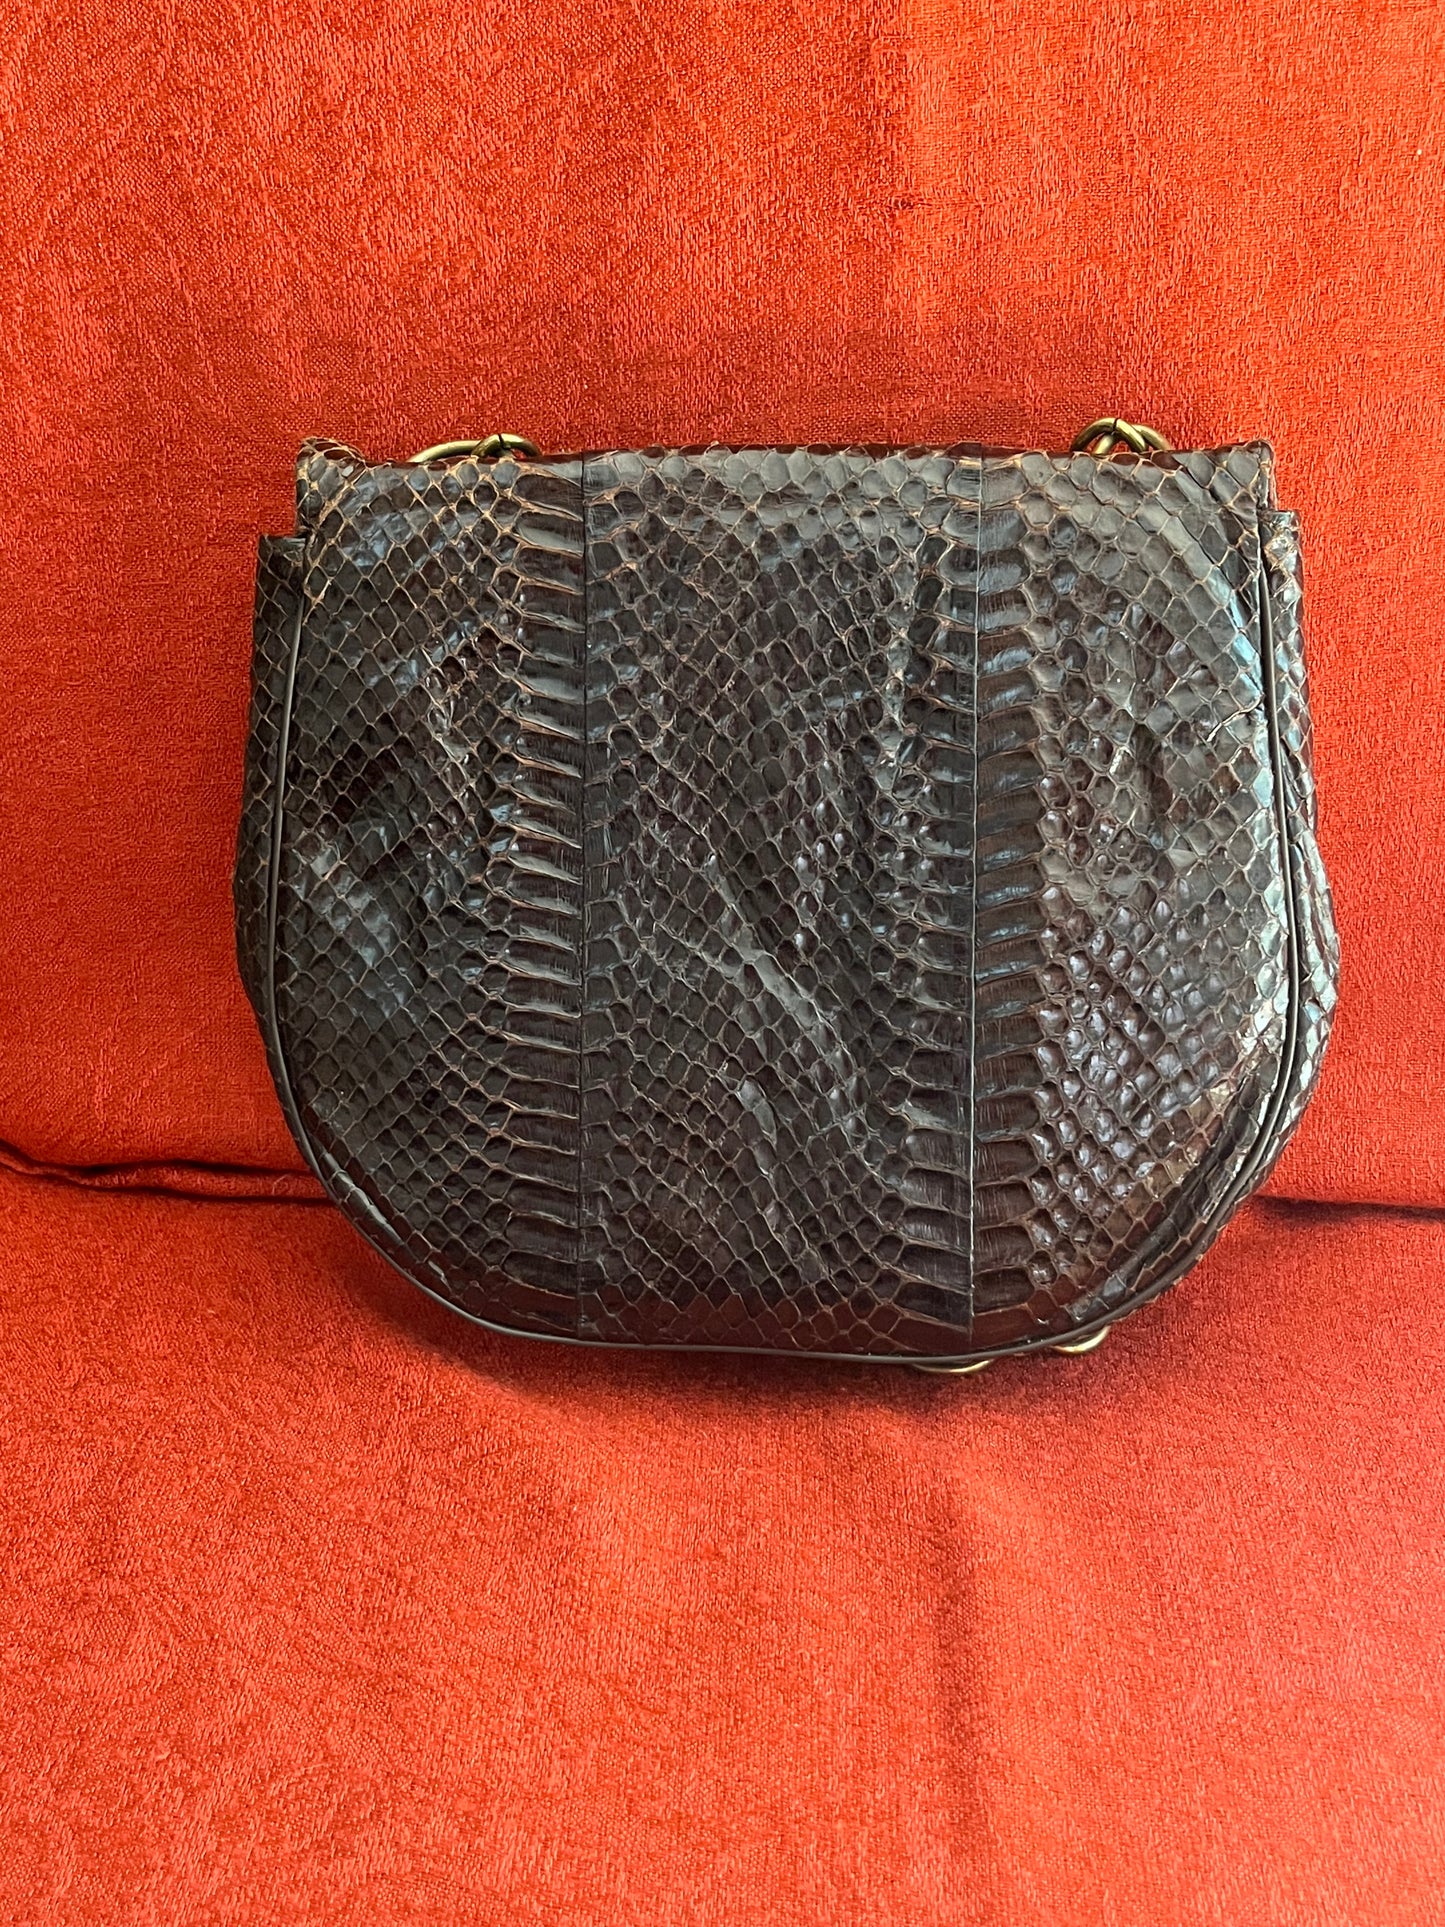 Vintage Snakeskin Bag with Brass Chain